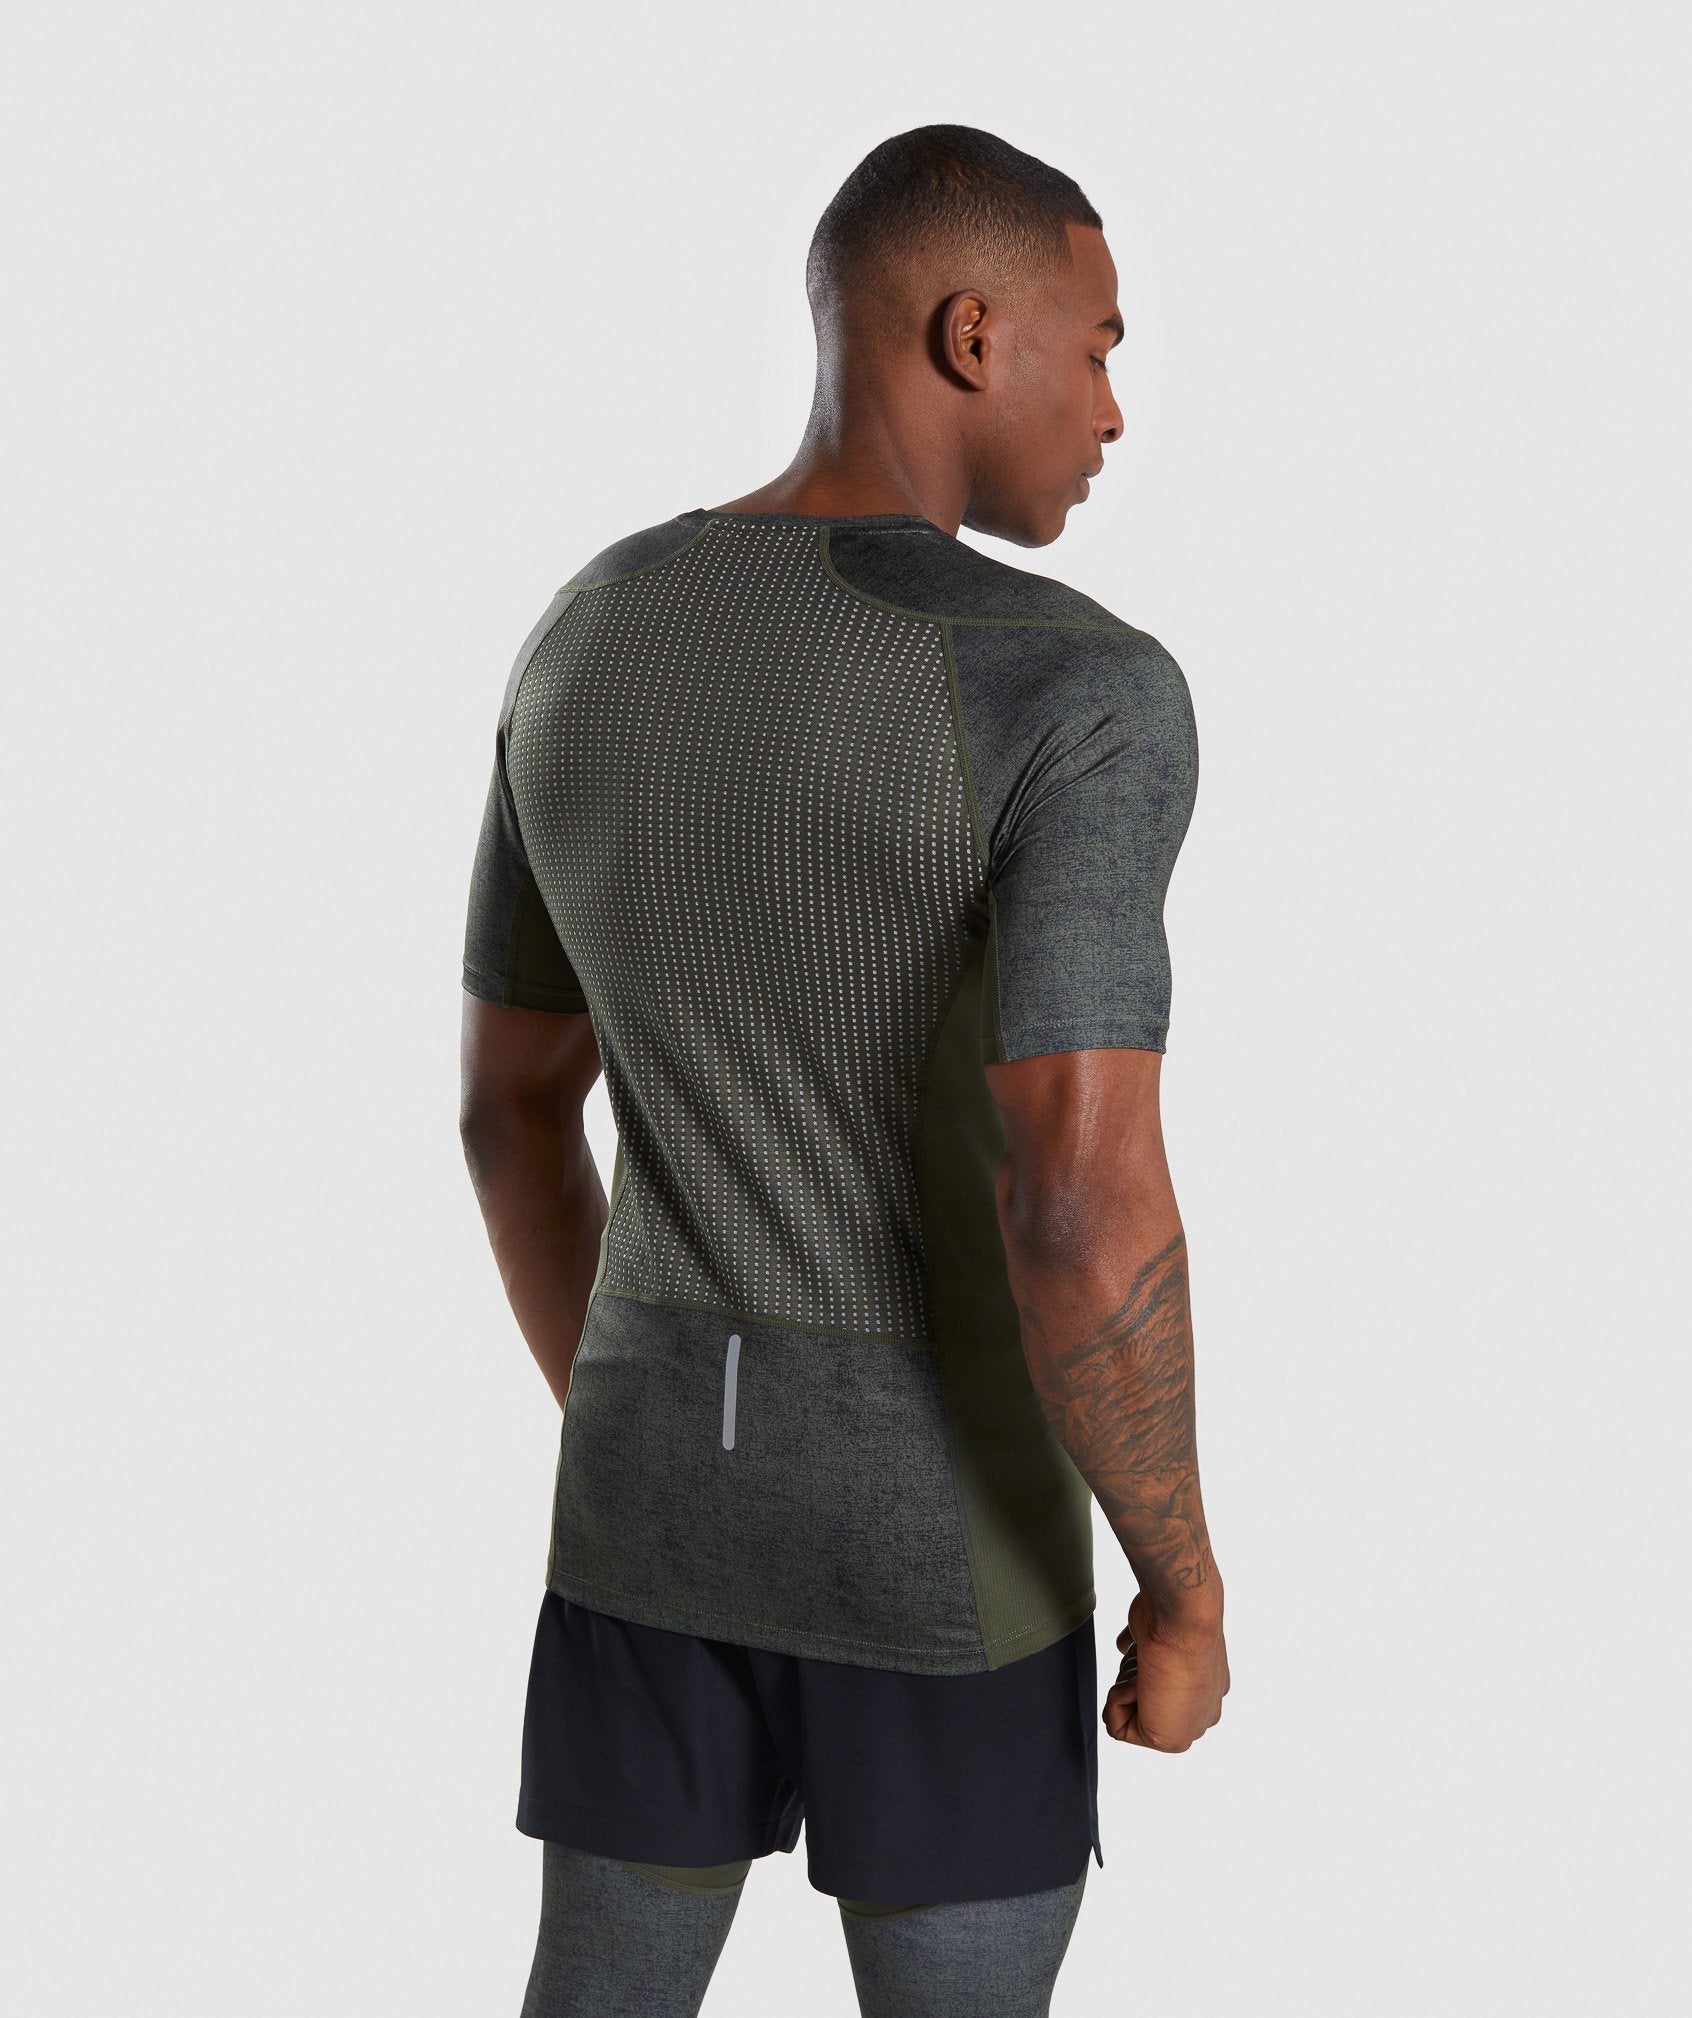 Hybrid Baselayer Top in Woodland Green Marl - view 2